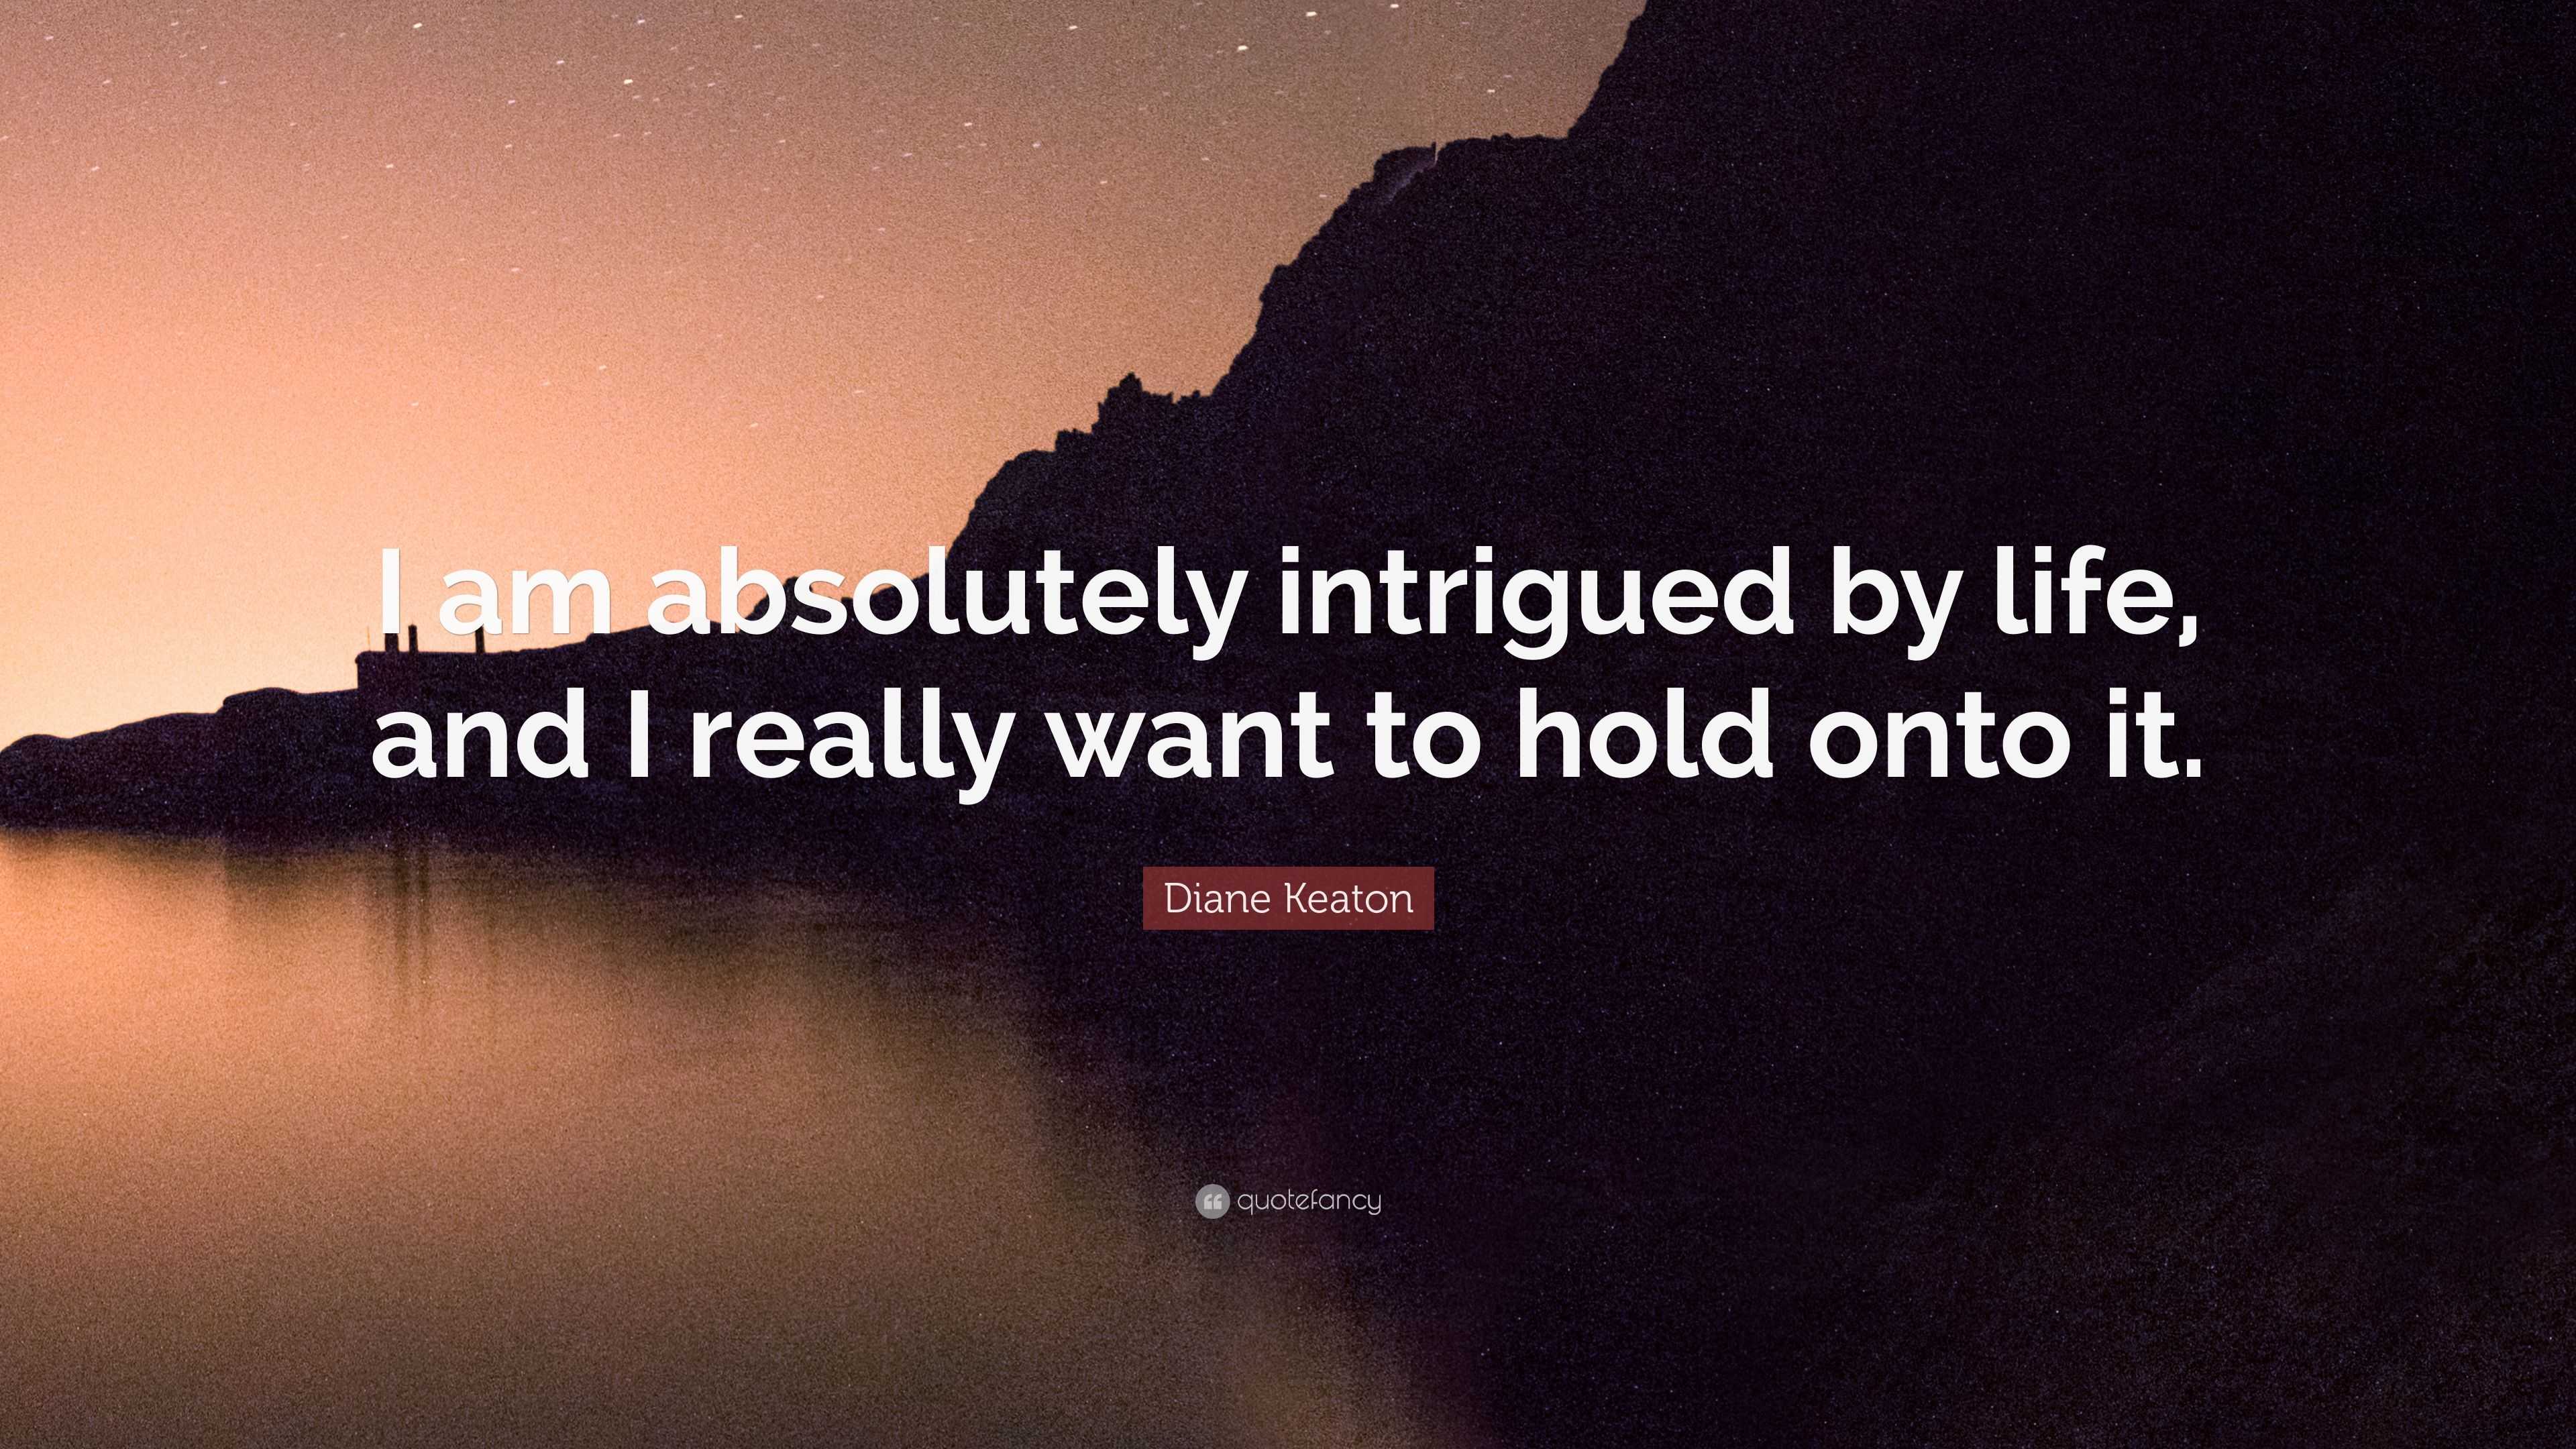 Diane Keaton Quote: “I am absolutely intrigued by life, and I really ...